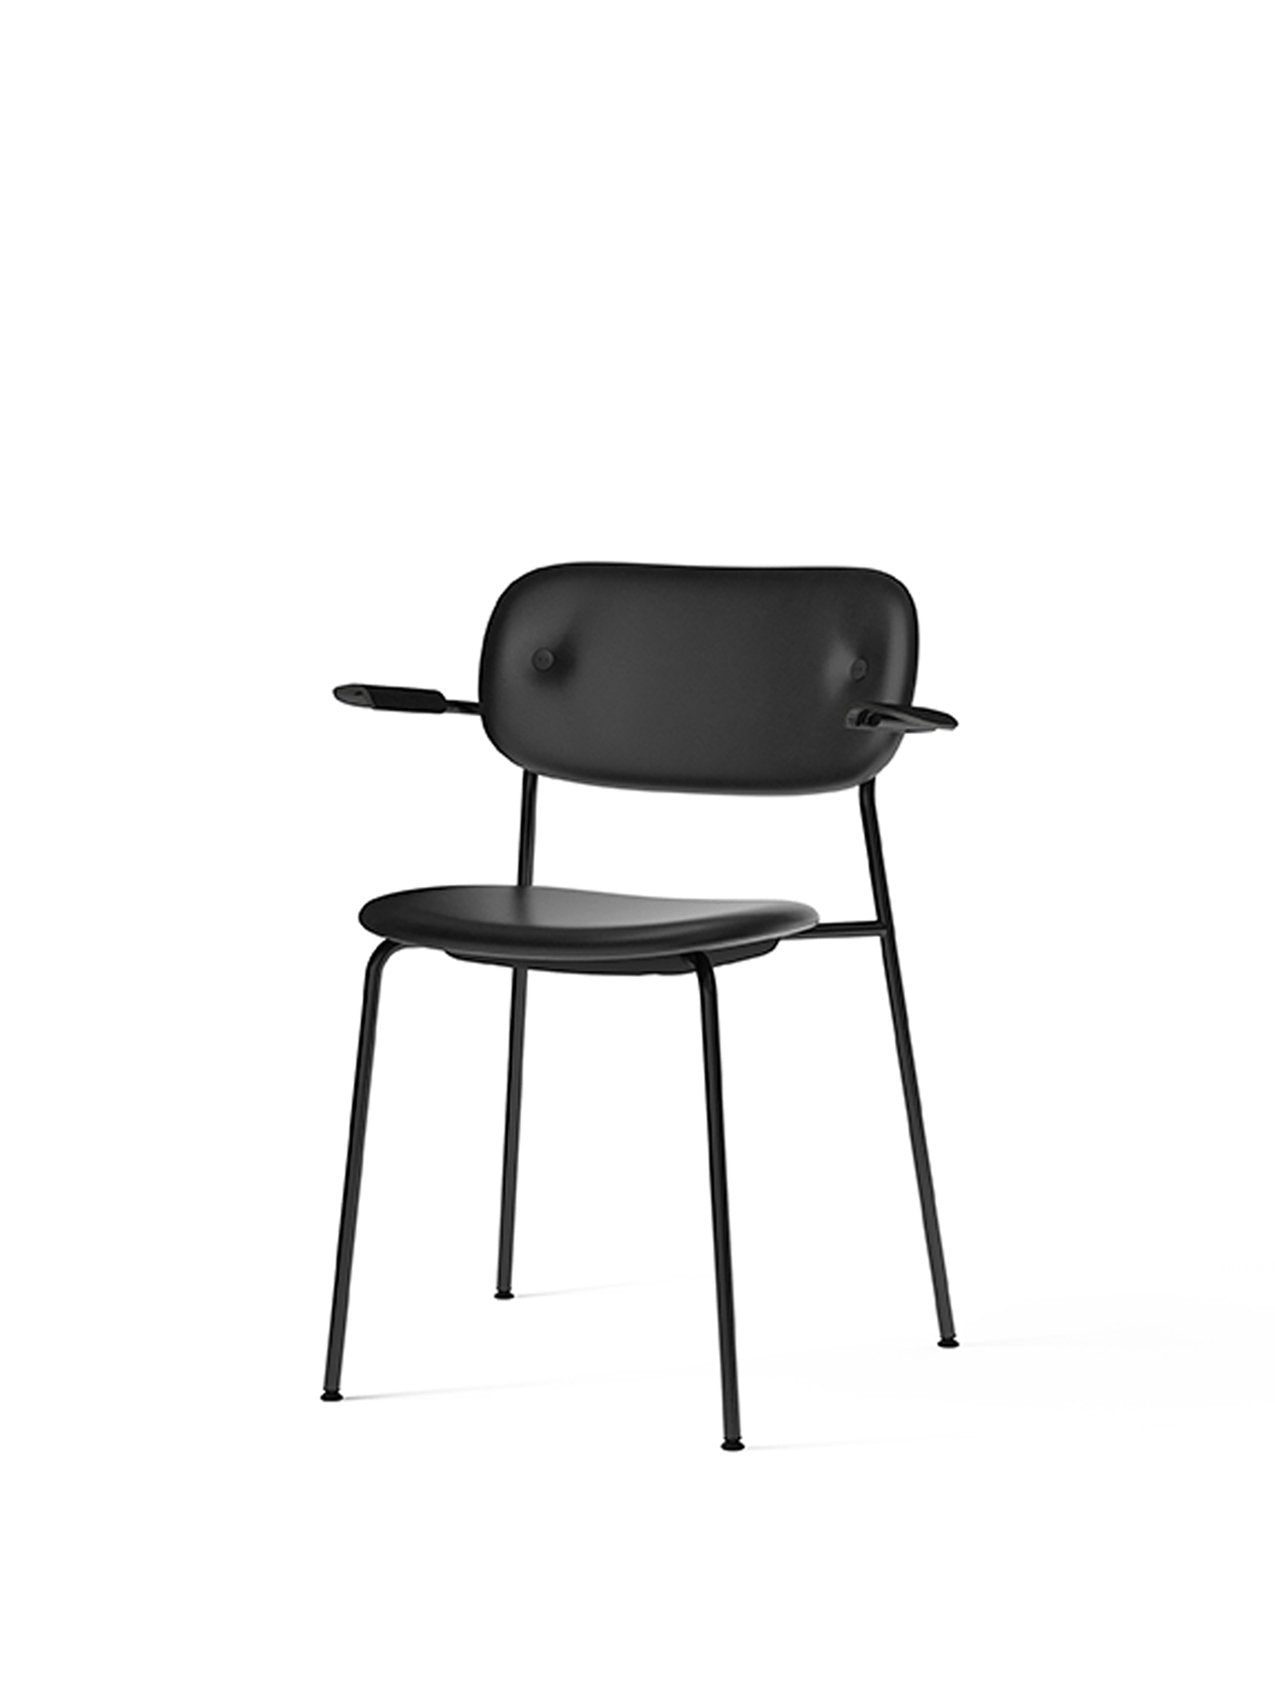 Co Chair, Fully Upholstered-Chair-Norm Architects-Dining Height (Seat 17.7in H)/Black Steel without Armrest-0250 Cognac/Dakar-menu-minimalist-modern-danish-design-home-decor